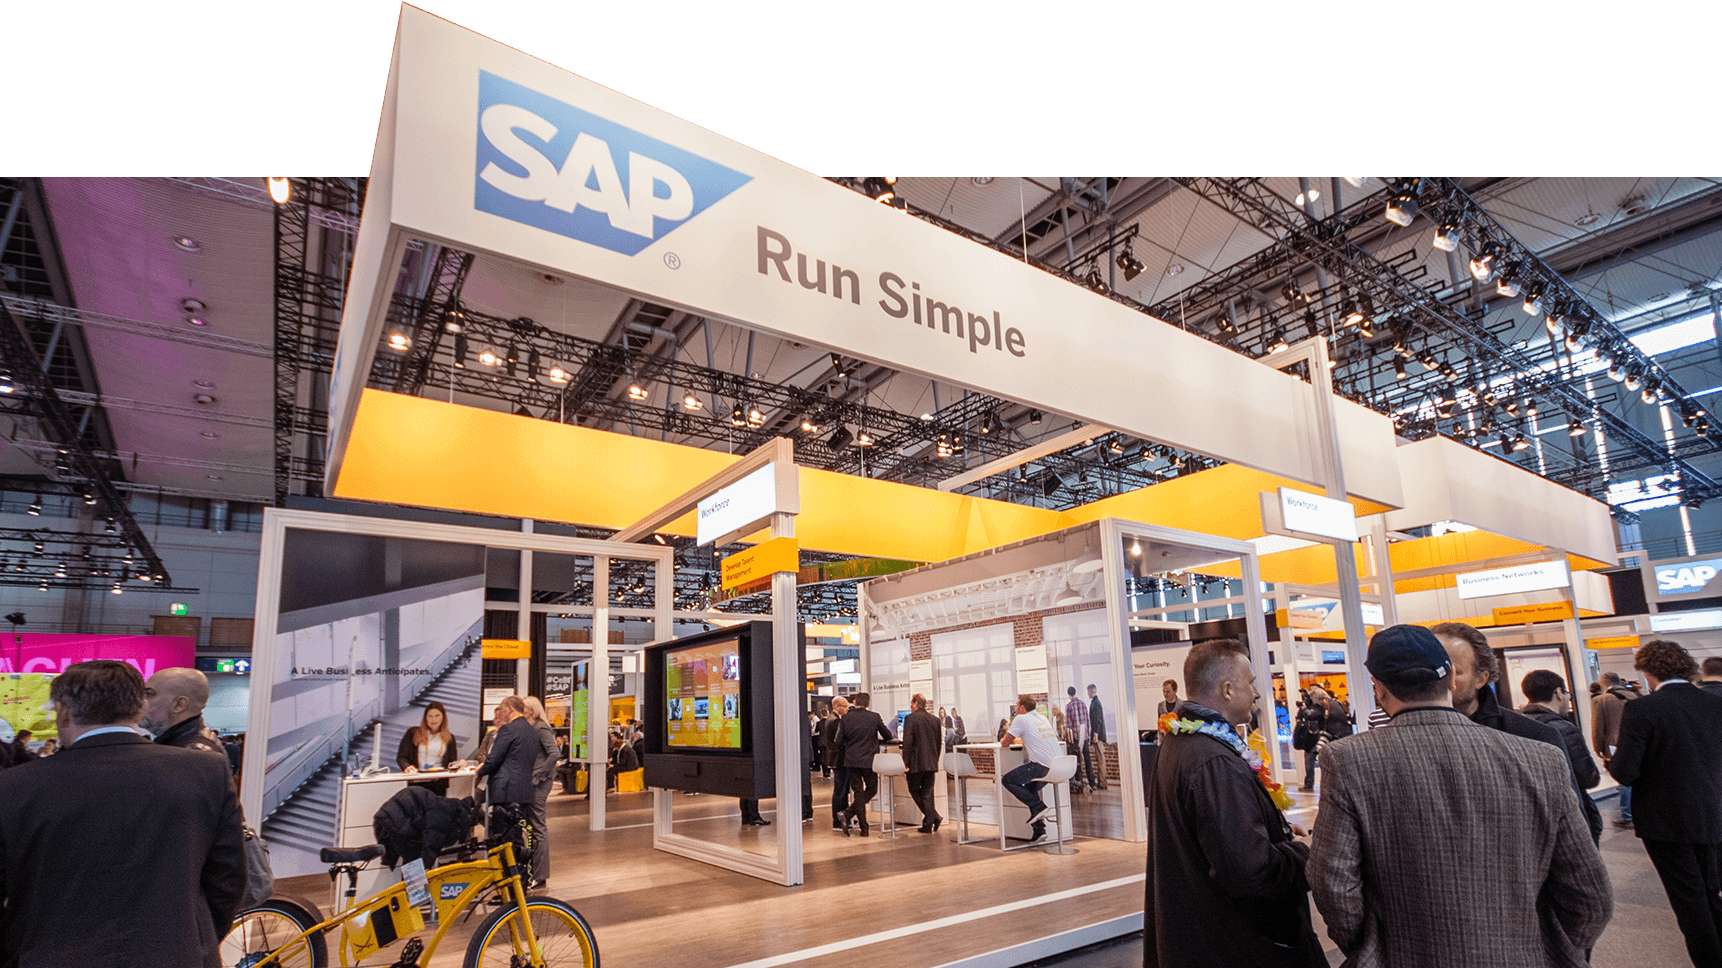 Booth of SAP company at CeBIT information technology trade show in Hannover